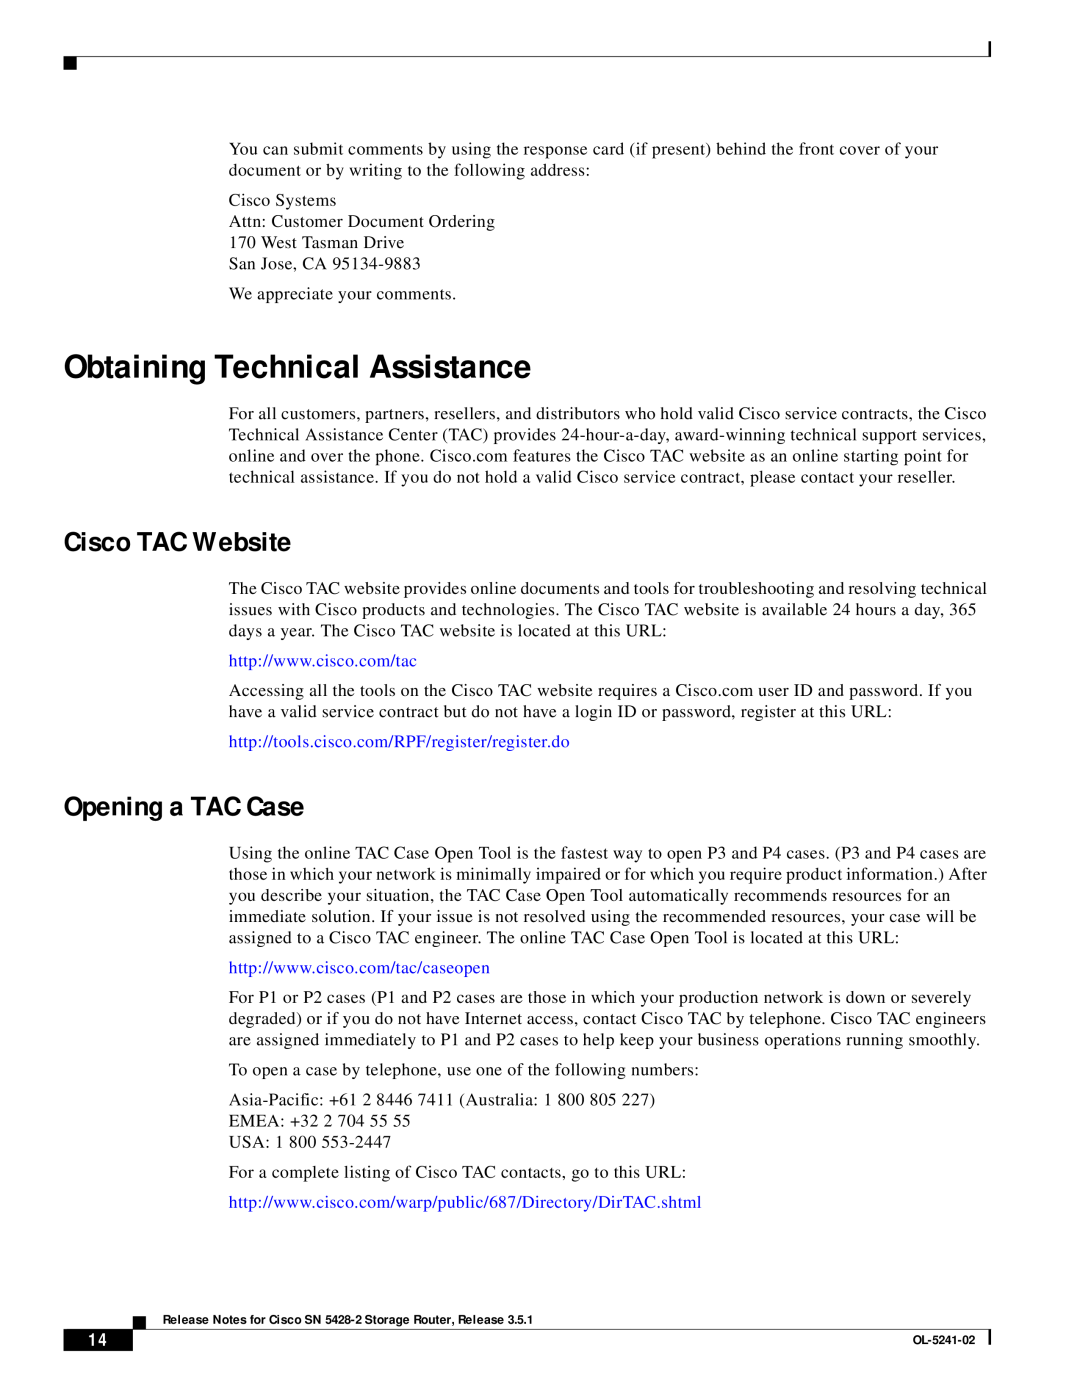 Cisco Systems SN 5428-2 manual Obtaining Technical Assistance, Cisco TAC Website, Opening a TAC Case 